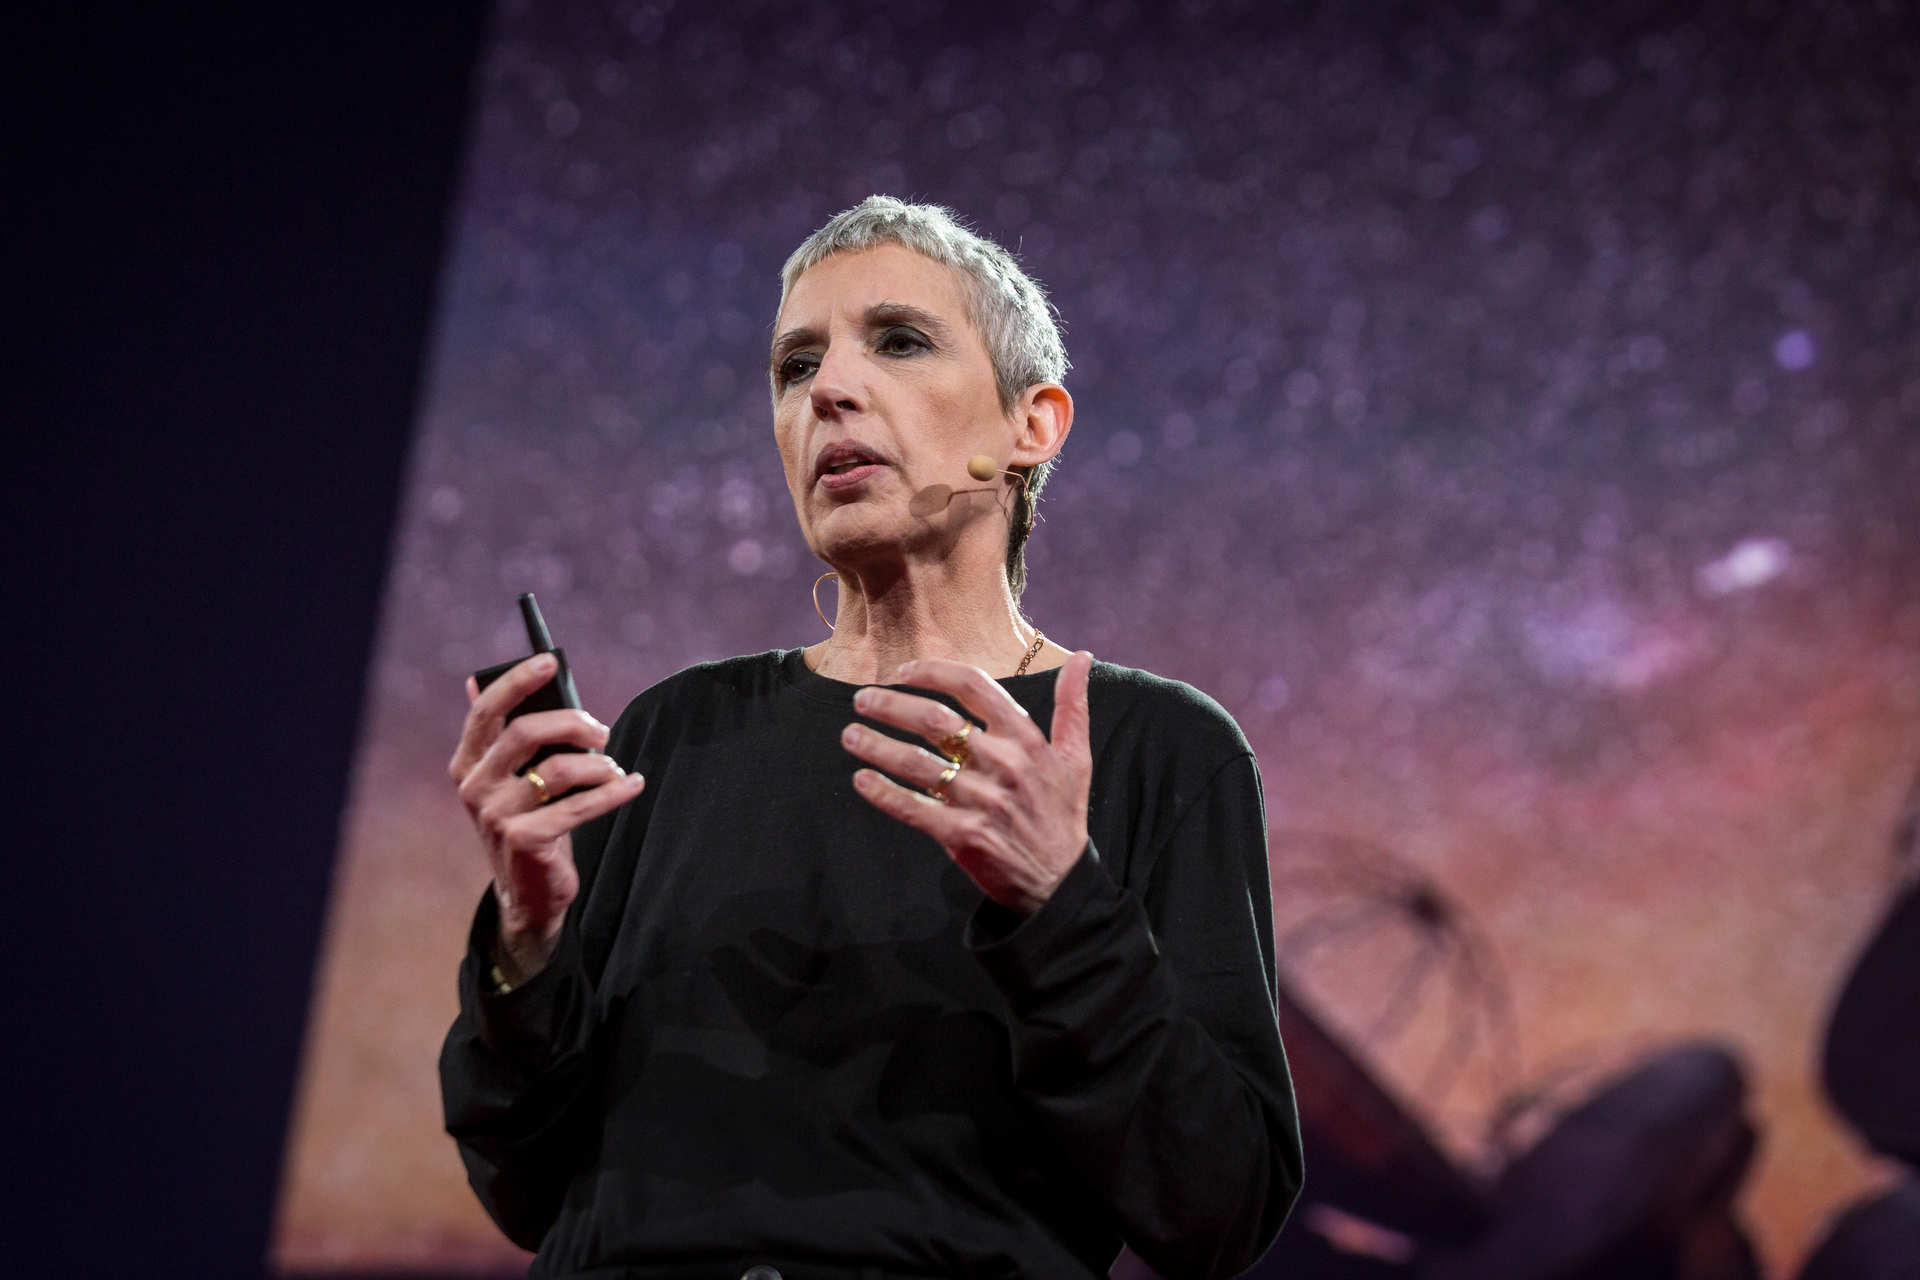 Nathalie Cabrol speaks at TED2015 - Truth and Dare, Session 4. Photo: Bret Hartman/TED